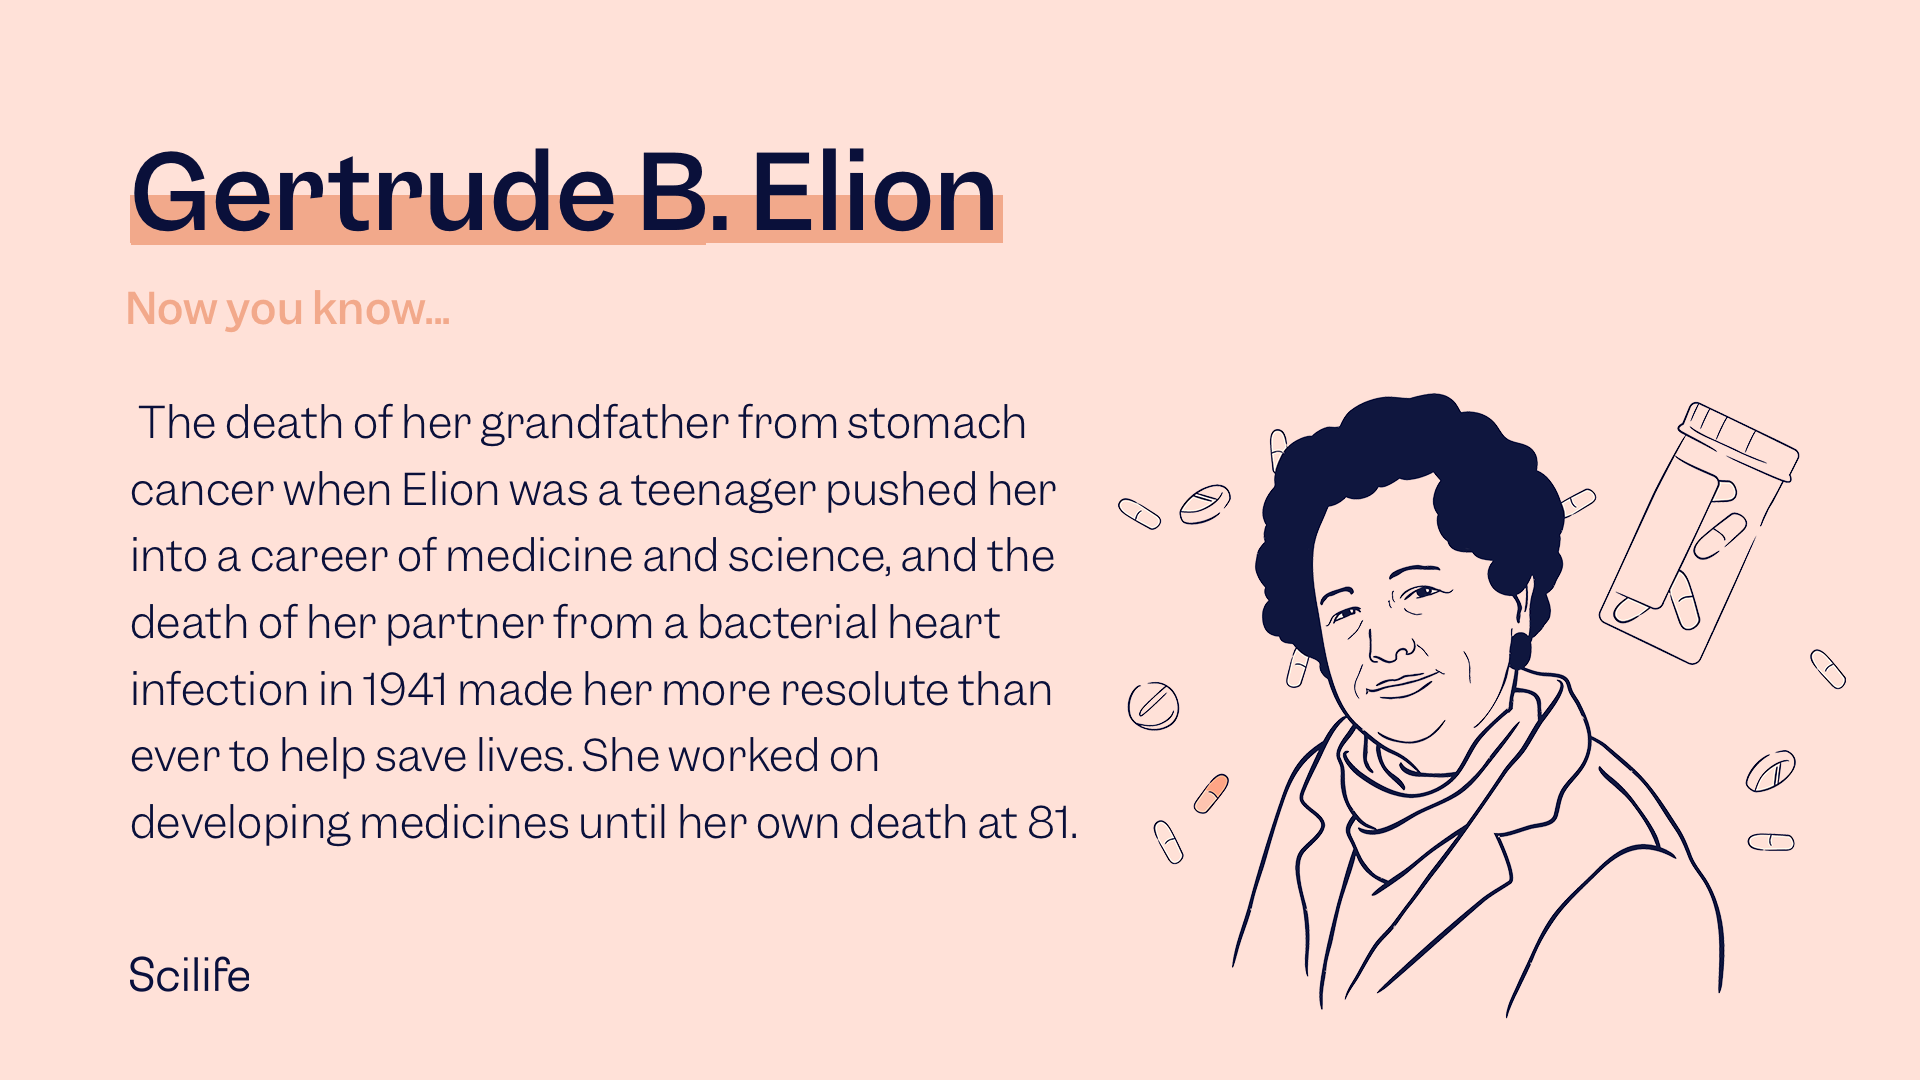 Illustration of Gestrude B. Elion: The death of her grandfather from stomach cancer when Elion was a teenager pushed her into a career of medicine and science, and the death of her partner from a bacterial heart infection in 1941 made her more resolute than ever to help save lives. She worked on developing medicines until her own death at 81 years old.